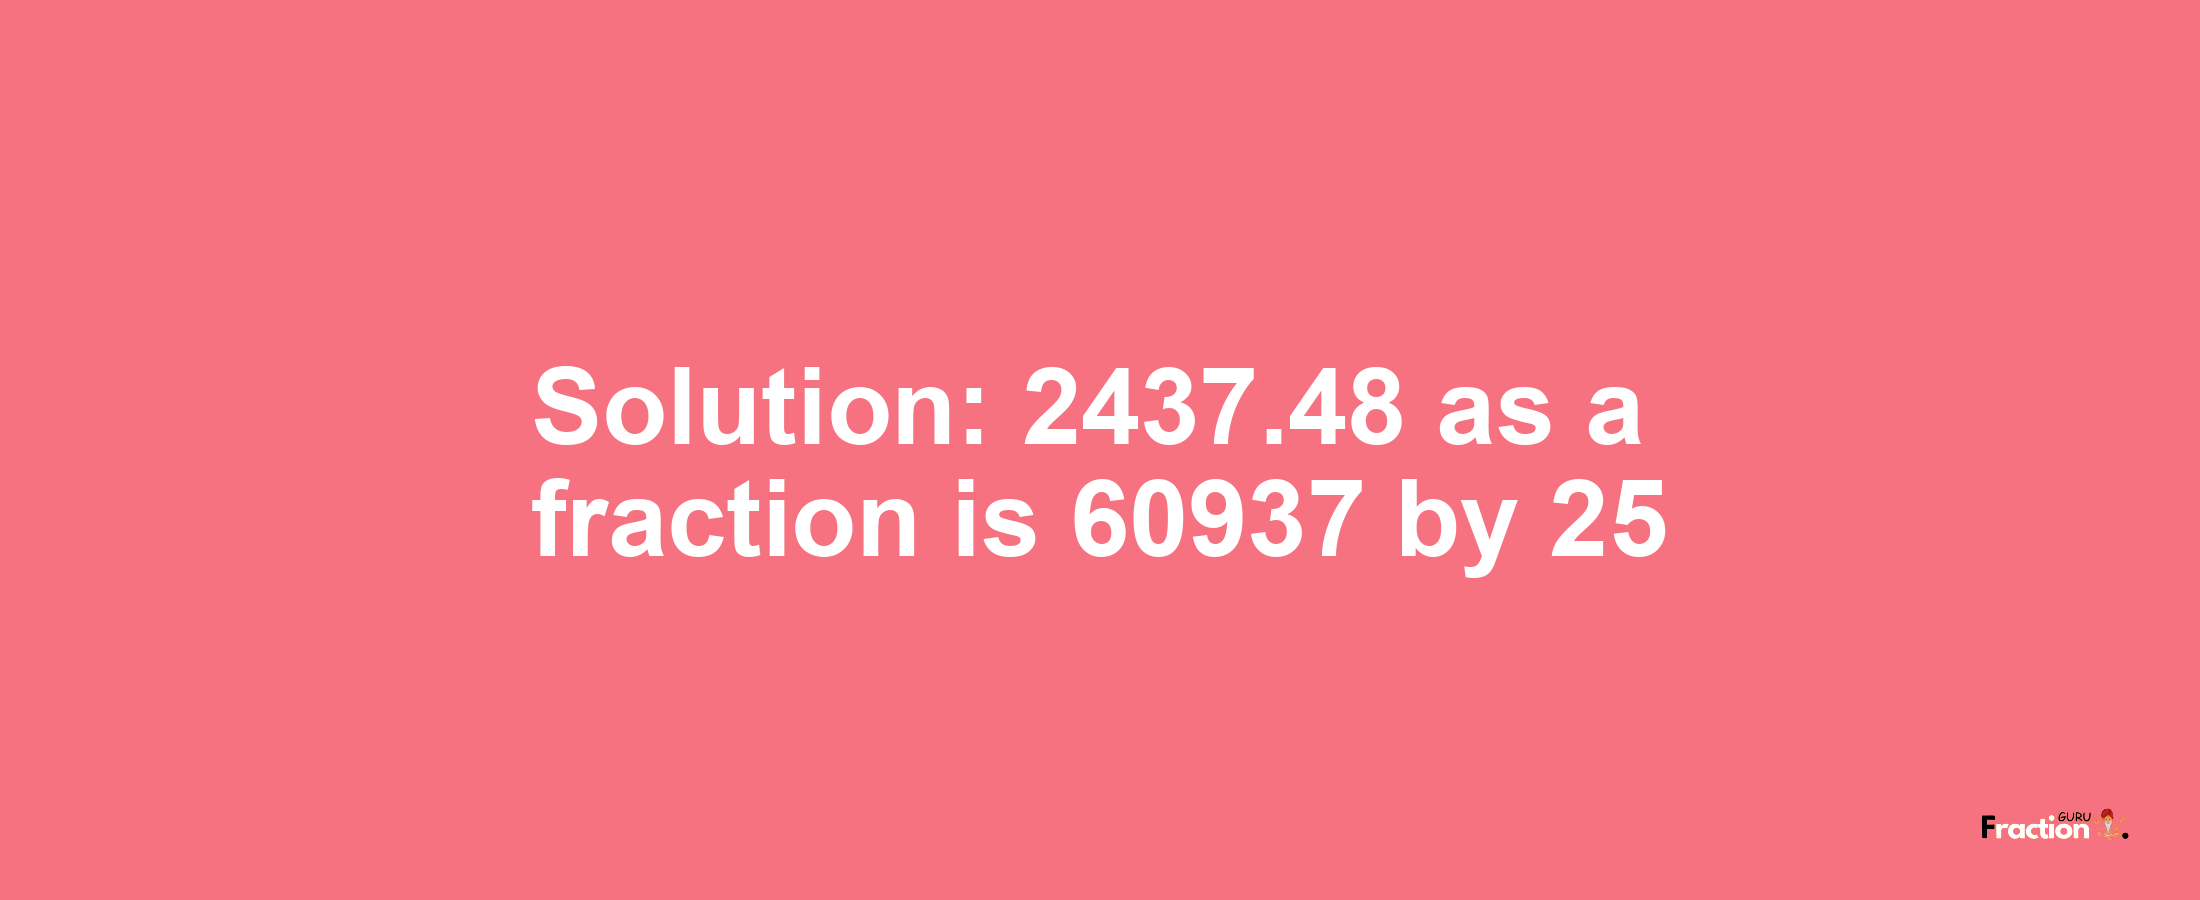 Solution:2437.48 as a fraction is 60937/25